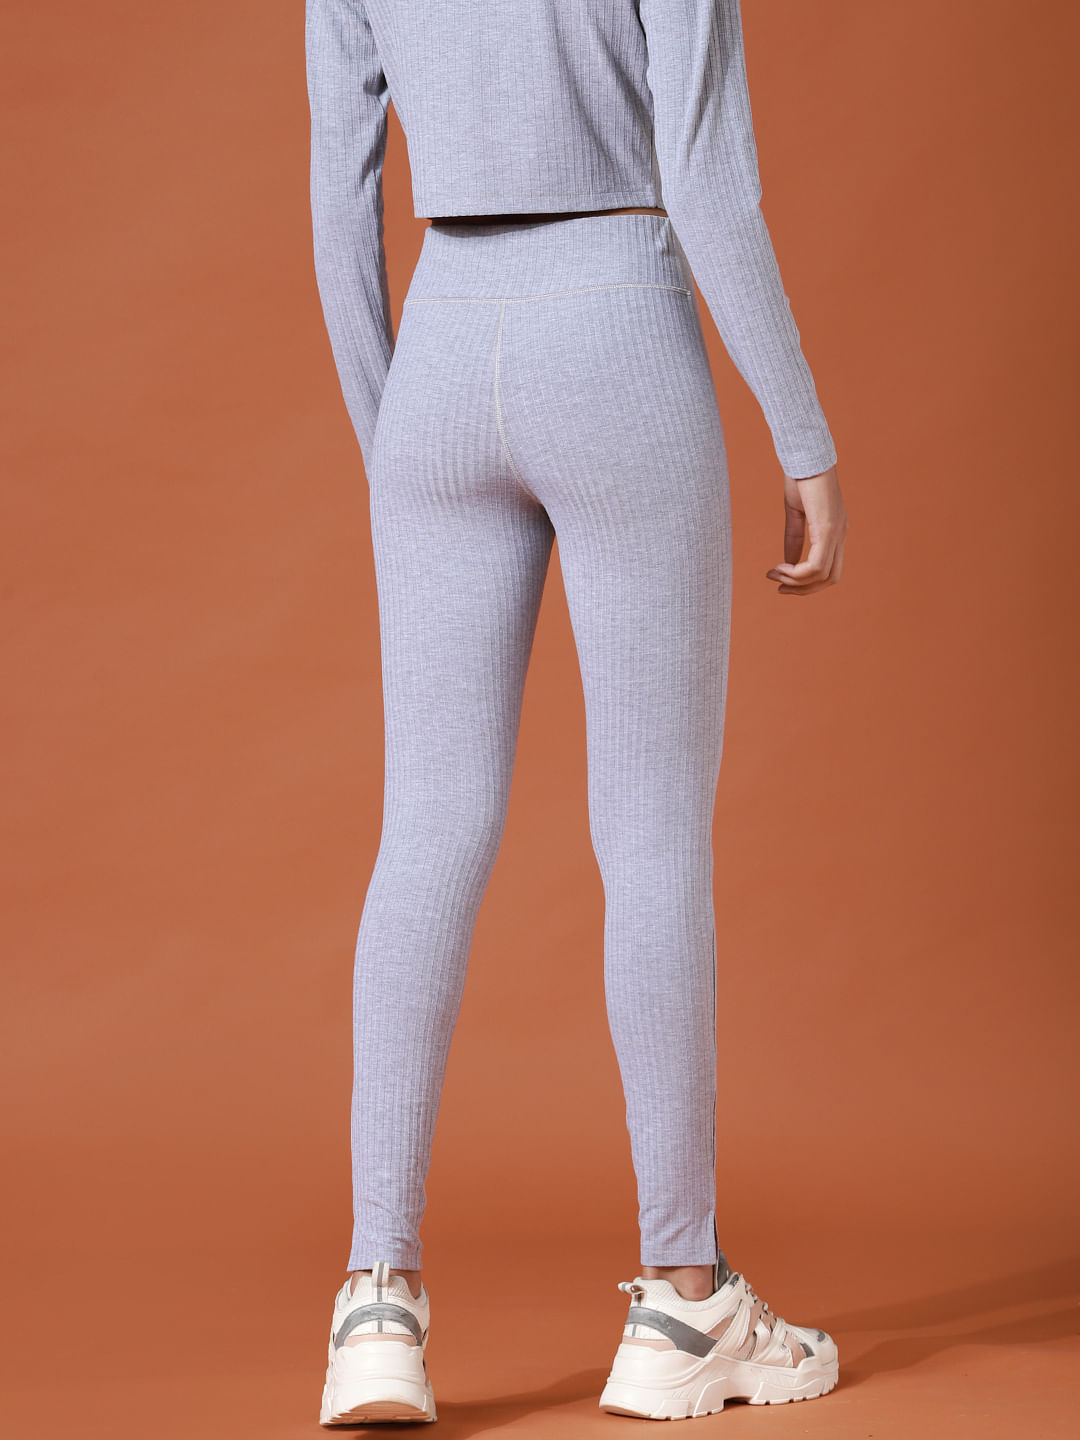 Activewear - Legging Sets – Glamify Famous For Loungewear